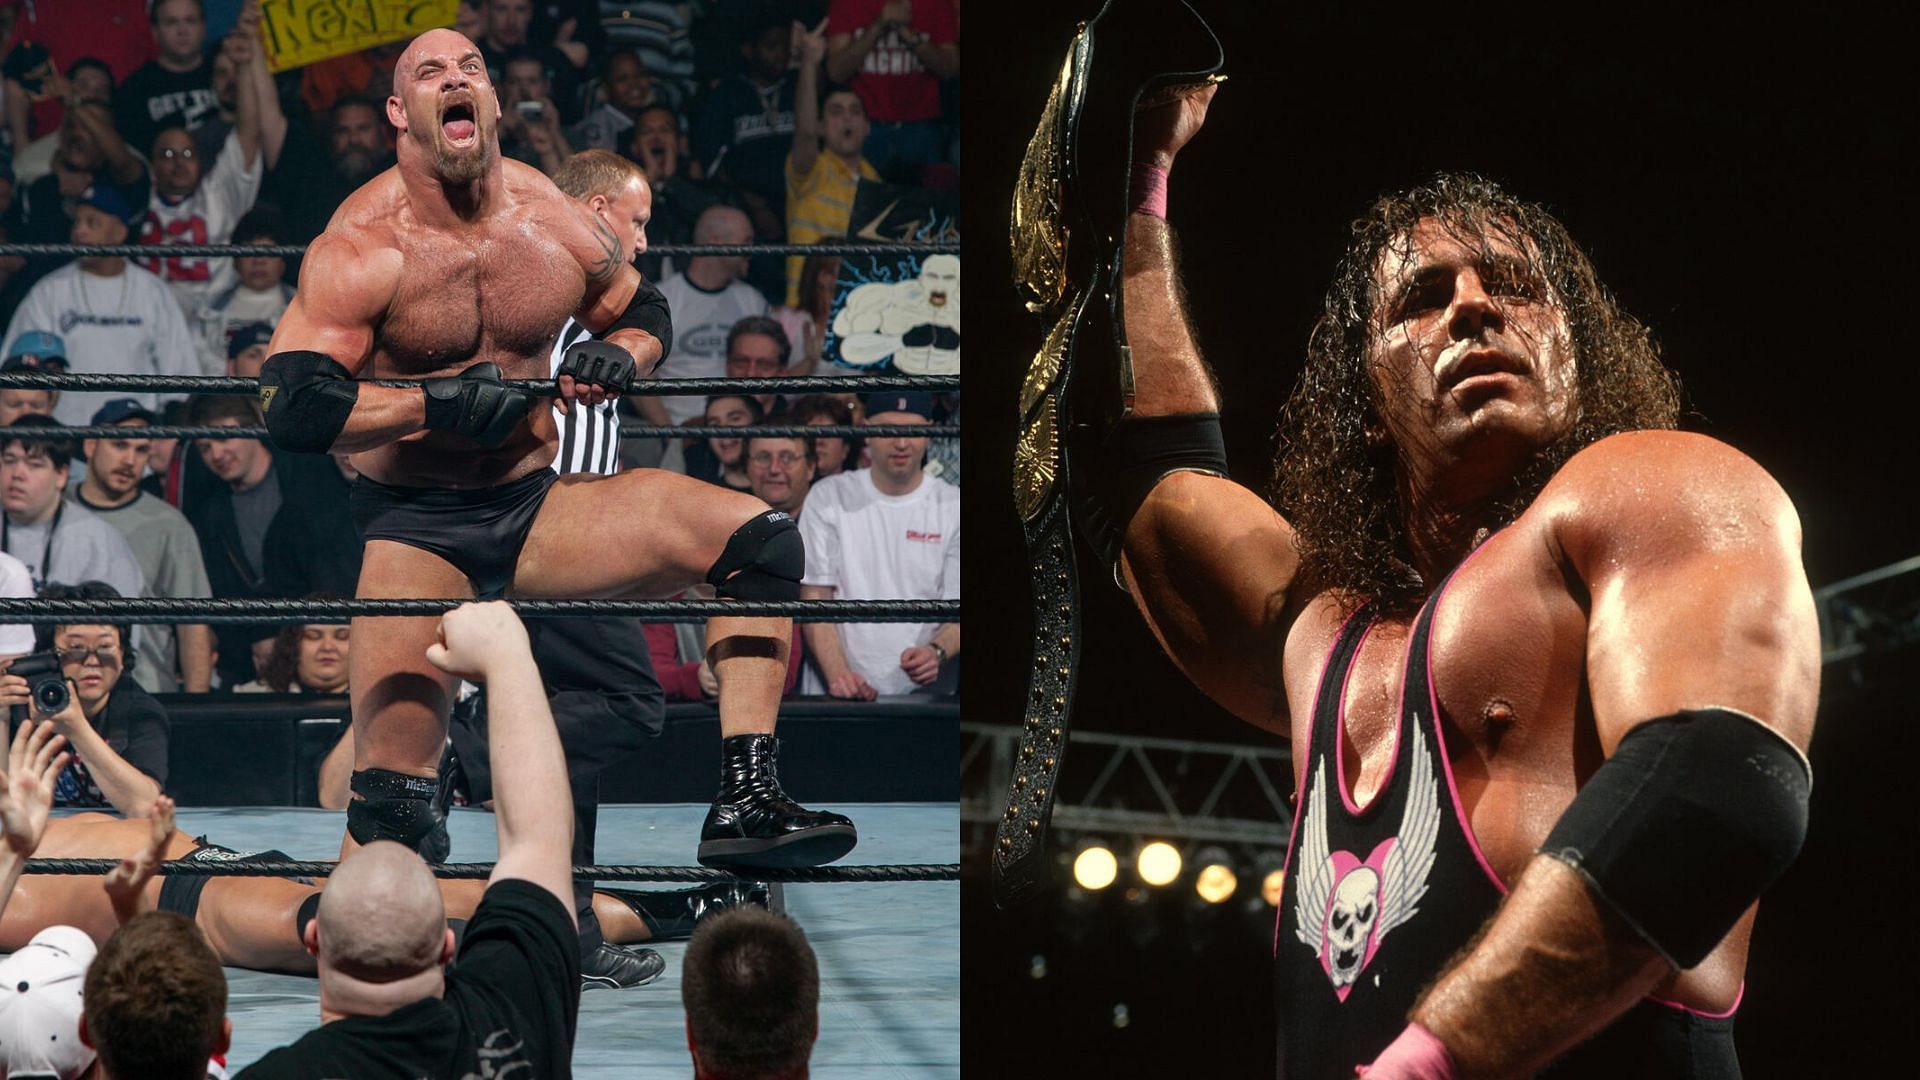 Goldberg and Bret Hart are WWE Hall of Famers [Photos courtesy of WWE